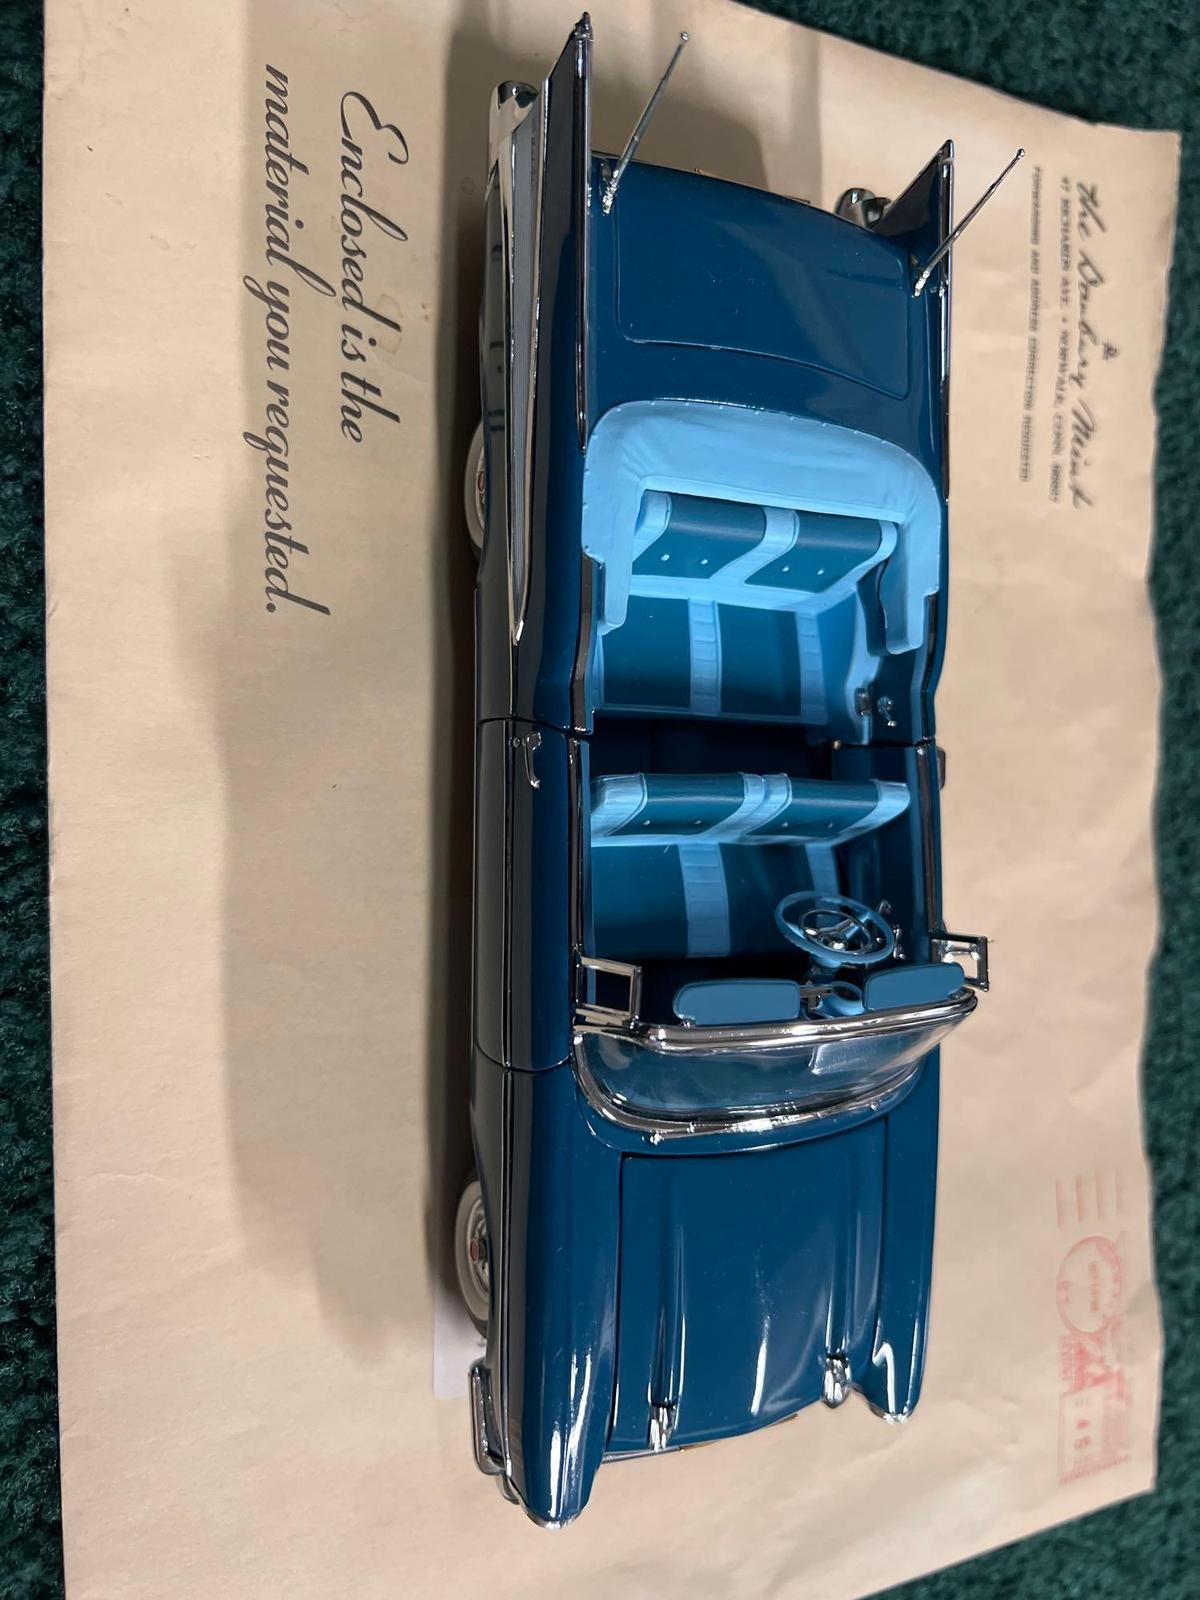 The 1957 Belair in Blue 1:27scale